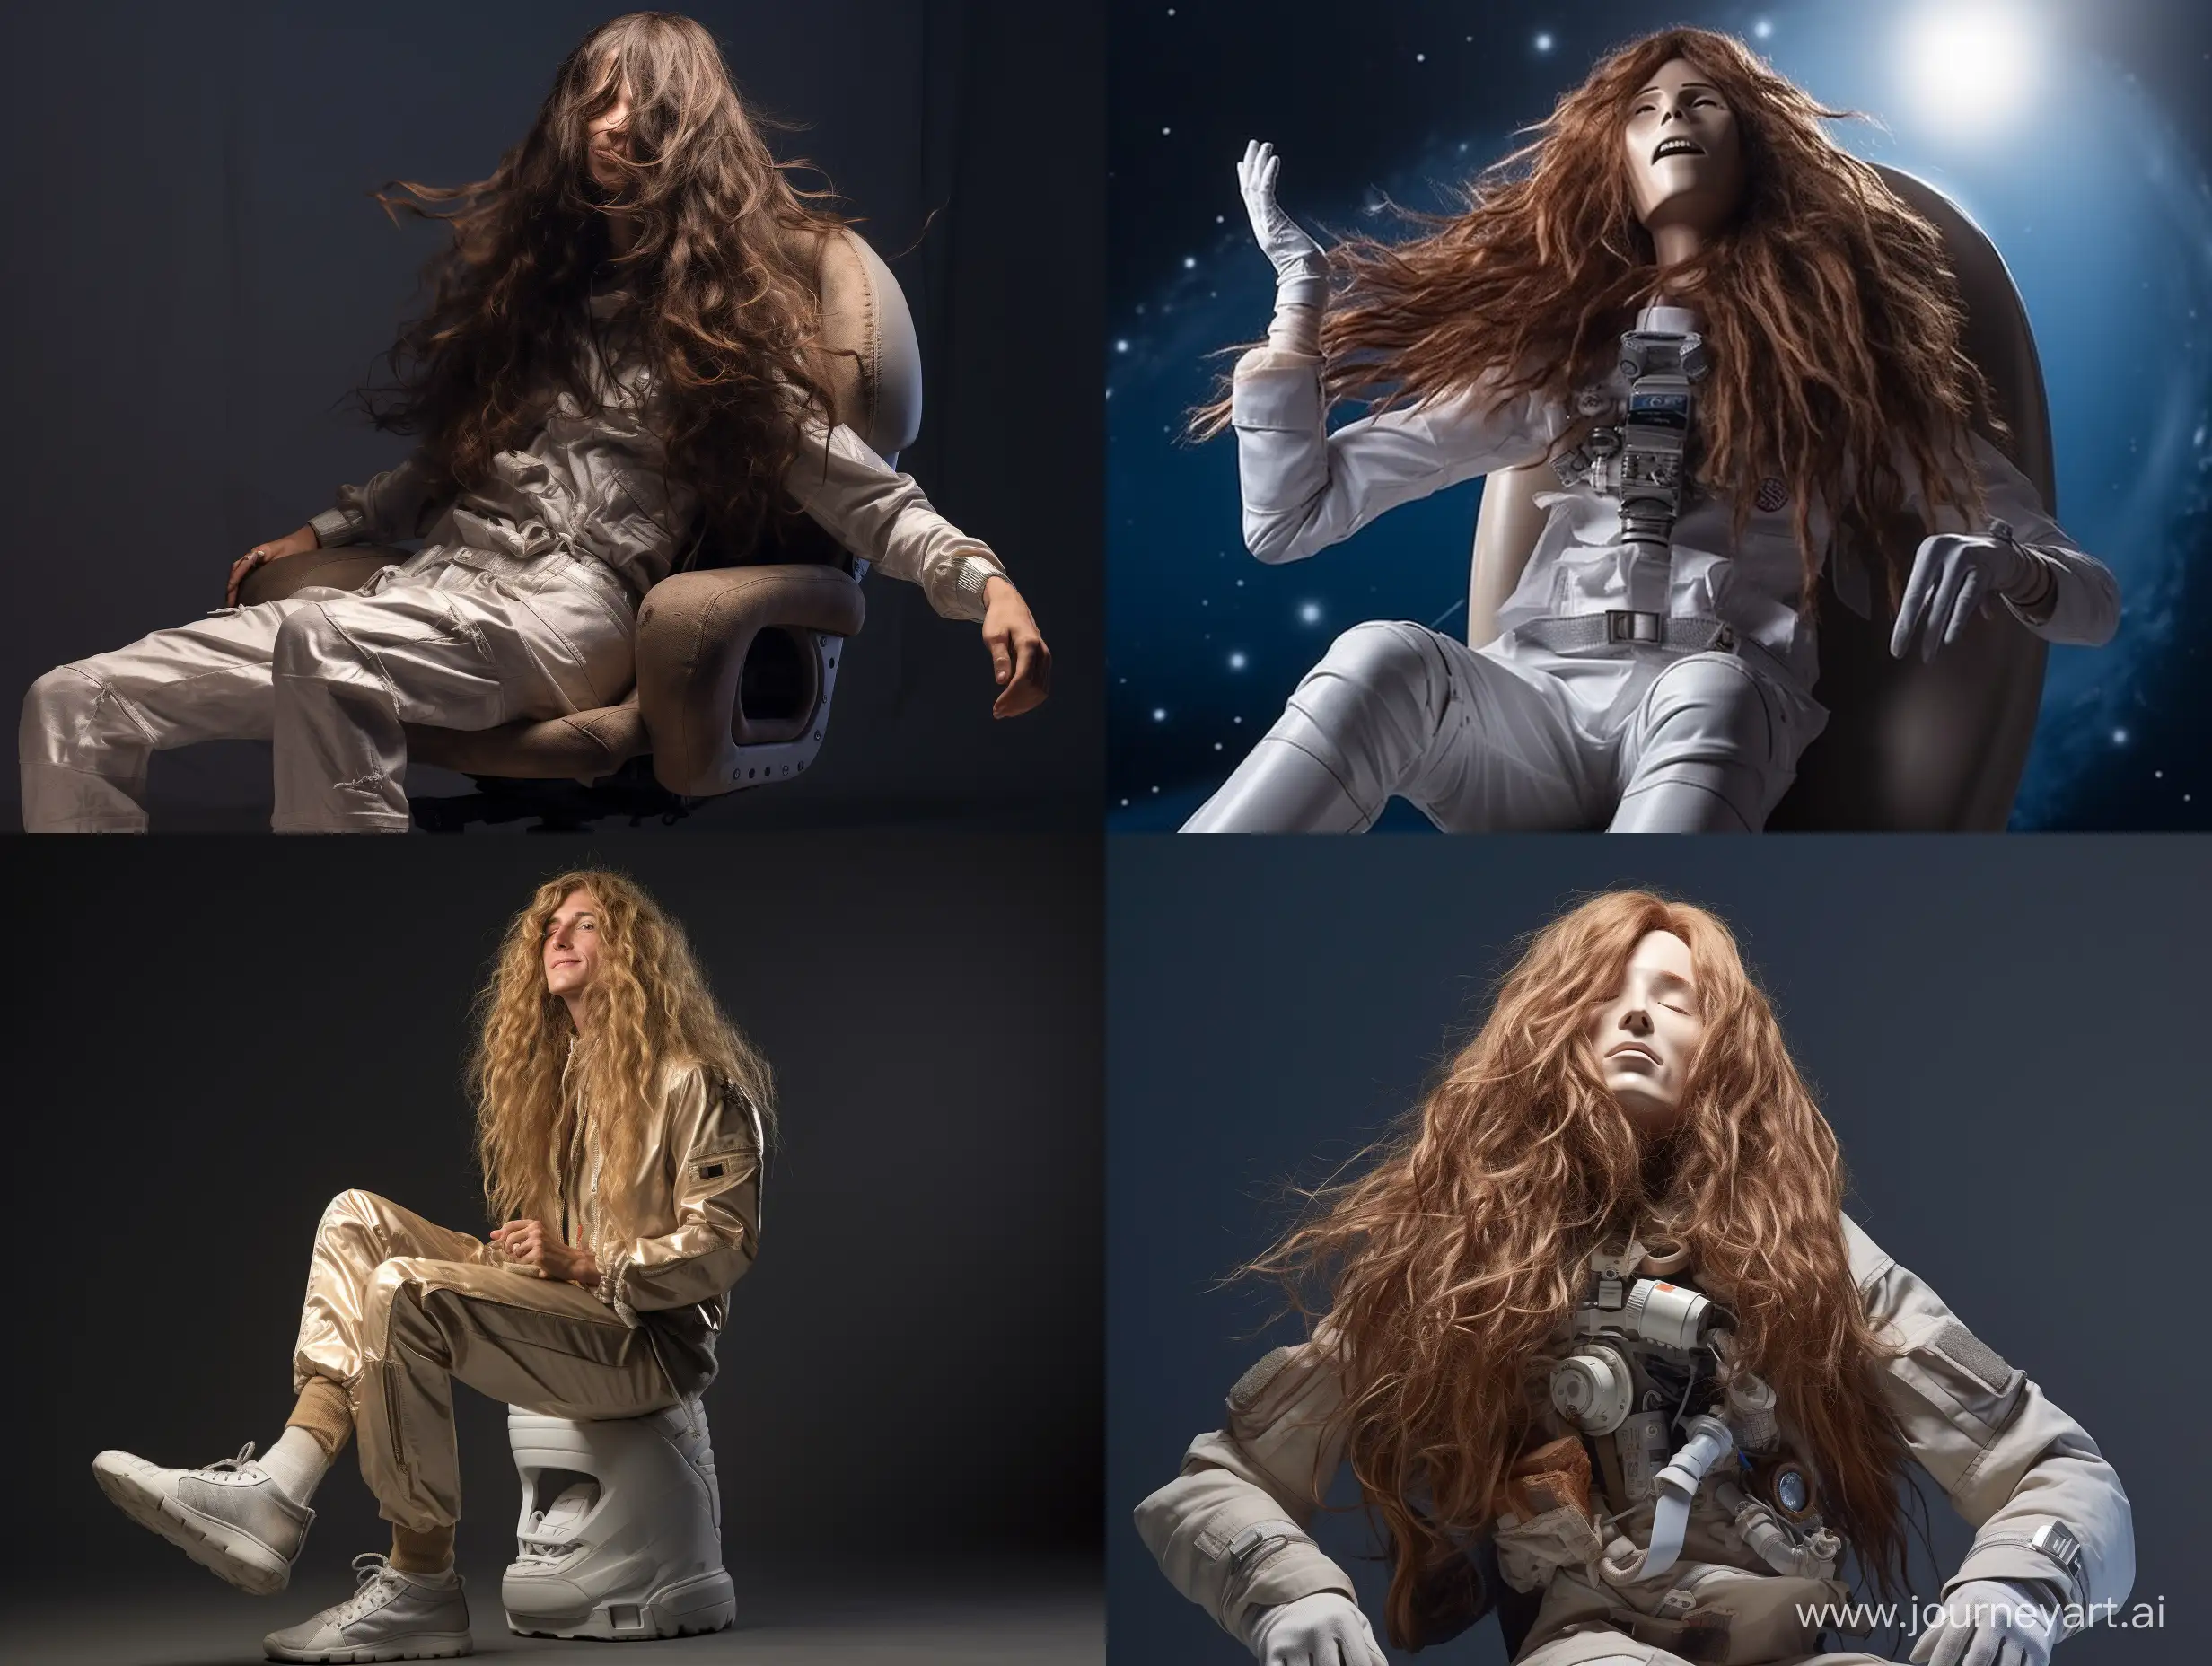 Enchanting-Realistic-Mannequin-with-Long-Hair-Dancing-on-an-Astronaut